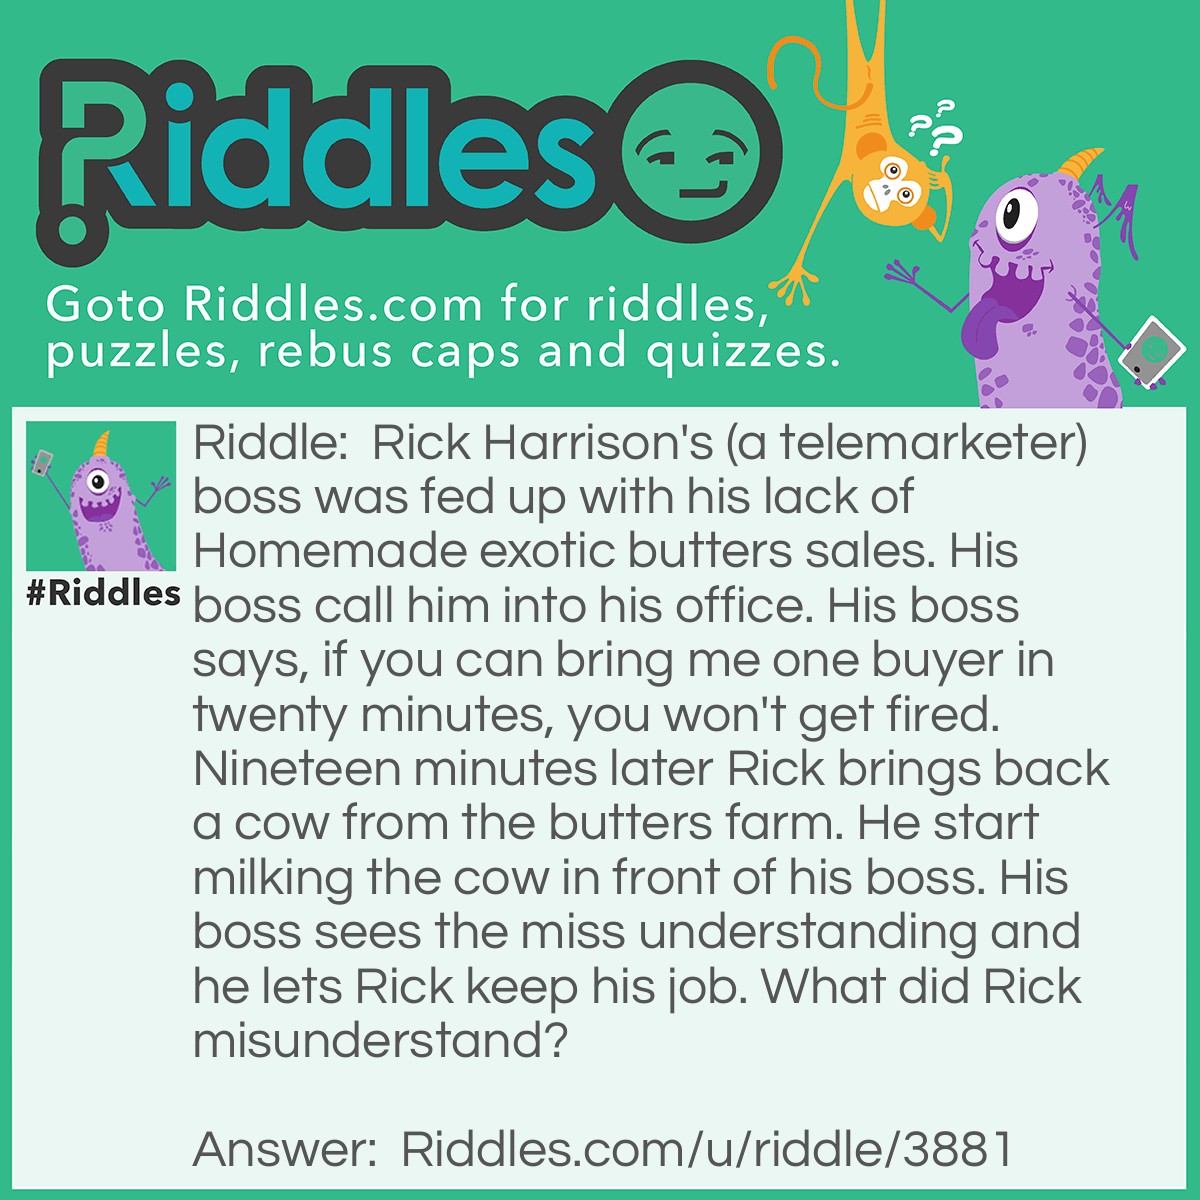 Riddle: Rick Harrison's (a telemarketer) boss was fed up with his lack of Homemade exotic butters sales. His boss call him into his office. His boss says, if you can bring me one buyer in twenty minutes, you won't get fired. Nineteen minutes later Rick brings back a cow from the butters farm. He start milking the cow in front of his boss. His boss sees the miss understanding and he lets Rick keep his job. What did Rick misunderstand? Answer: He thought his boss said "Byre" which is a homophone for buyer. Byre means Cowshed.